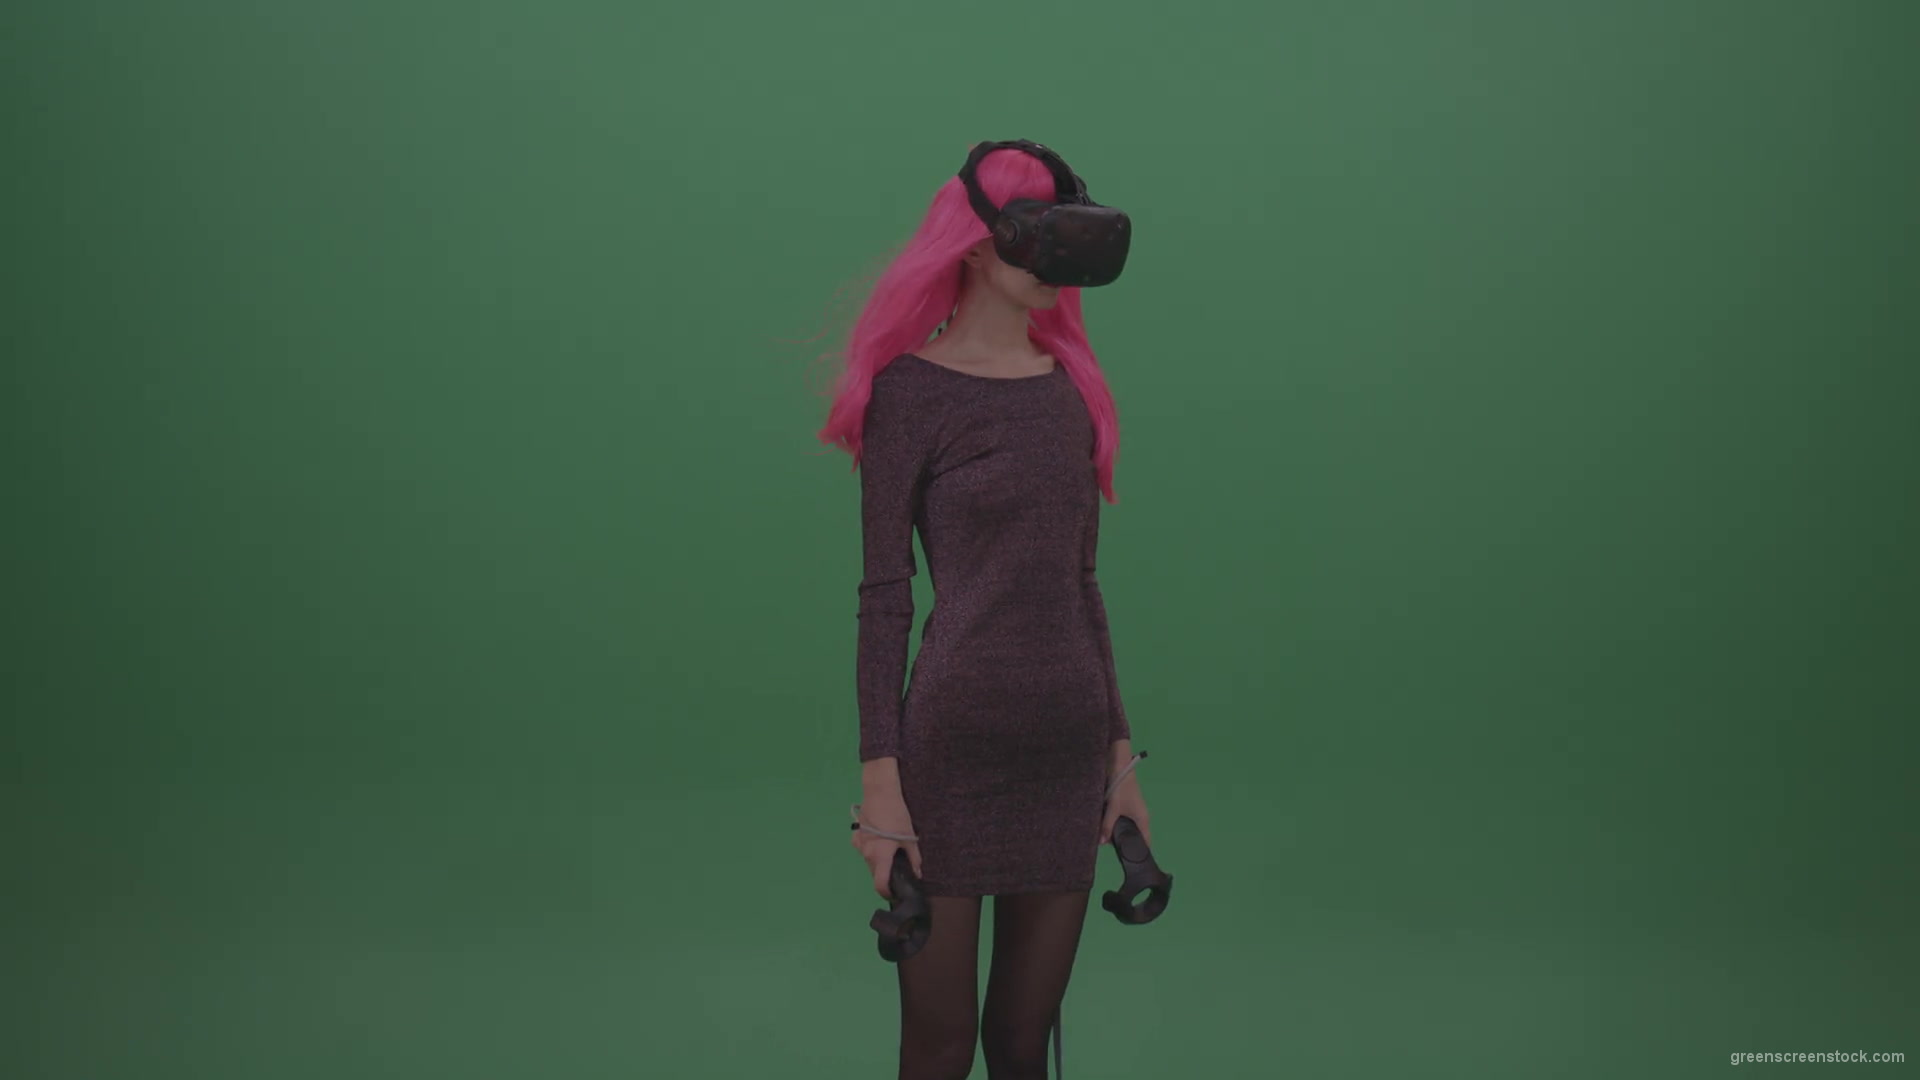 Pink_Hair_Young_Japanese_Anime_Rock_Girl_Shooting_Enemies_In_Virtual_Reality_Game_Heavy_Wind_Weather_Green_Screen_Wall_Background-1920_002 Green Screen Stock